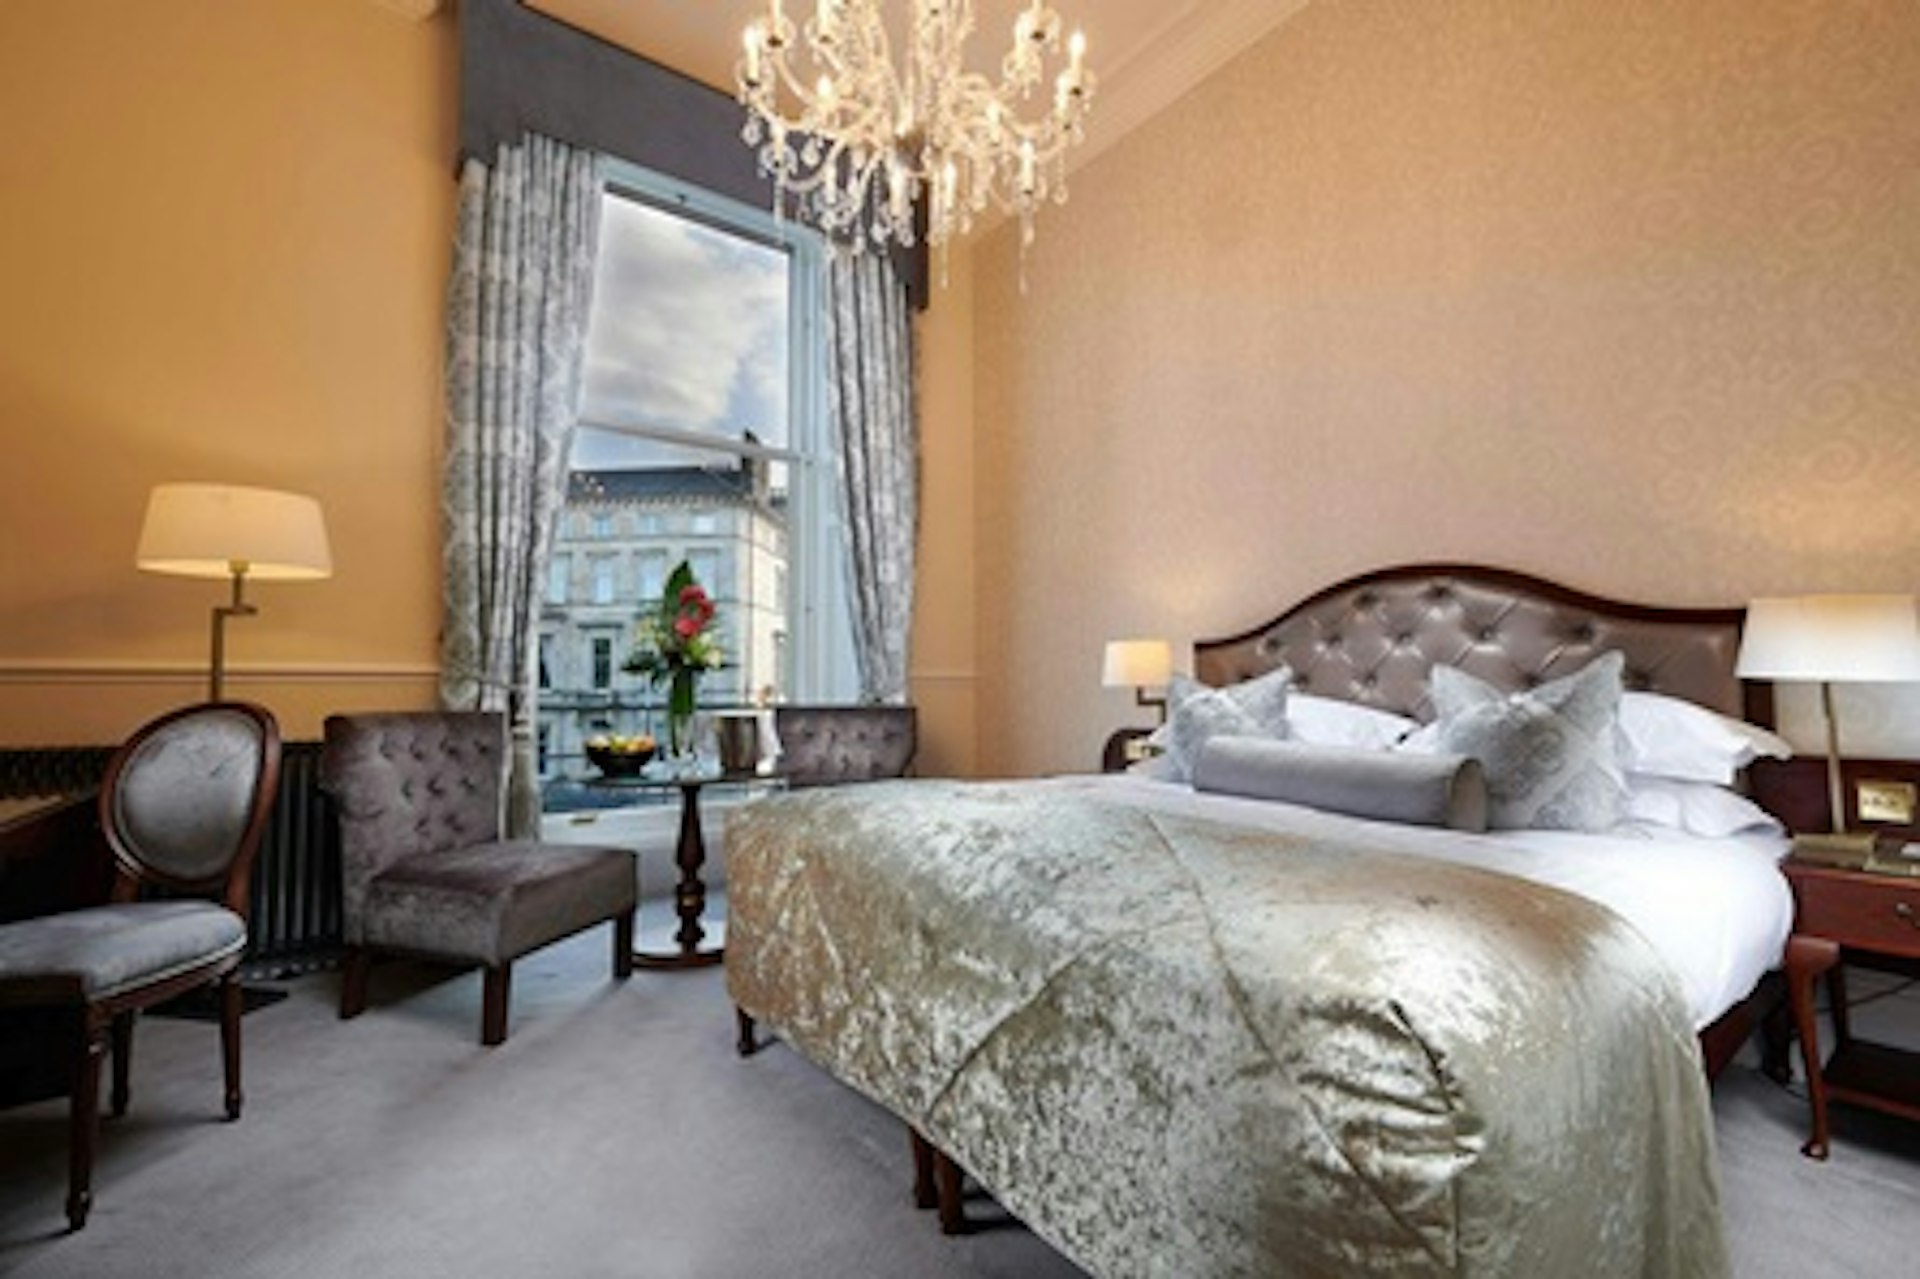 One Night Boutique Break with Dinner for Two at The Bonham Hotel, Edinburgh